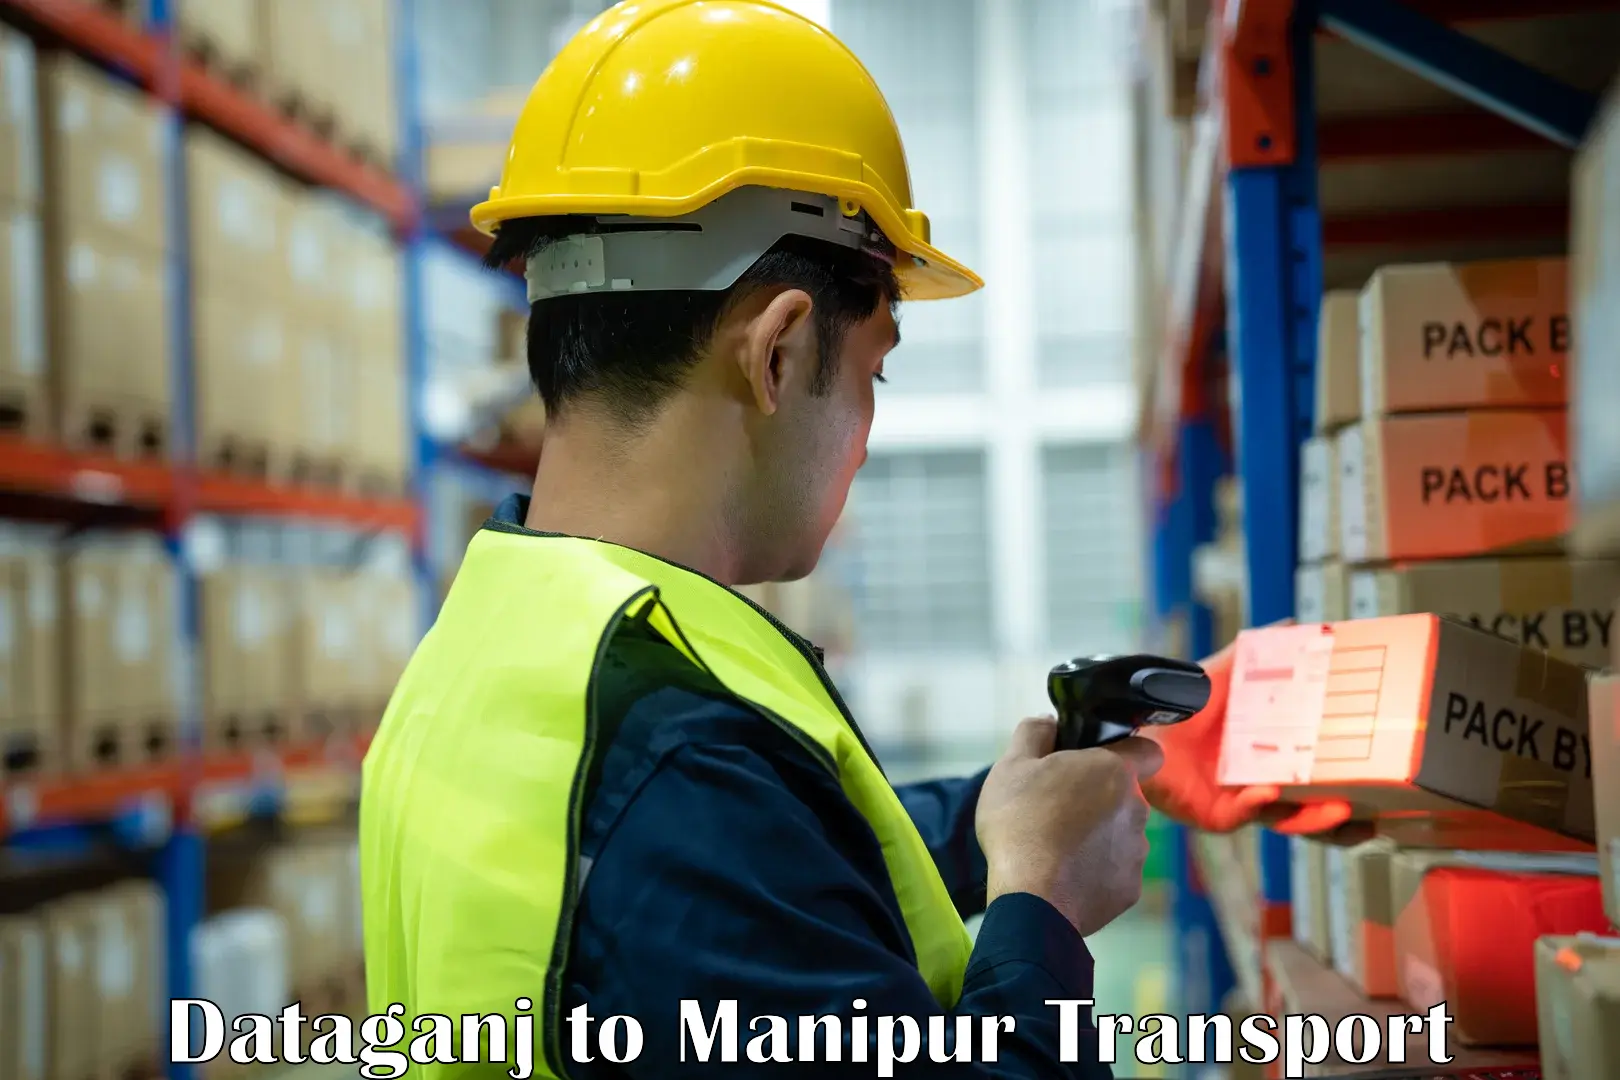 Transport shared services Dataganj to Manipur